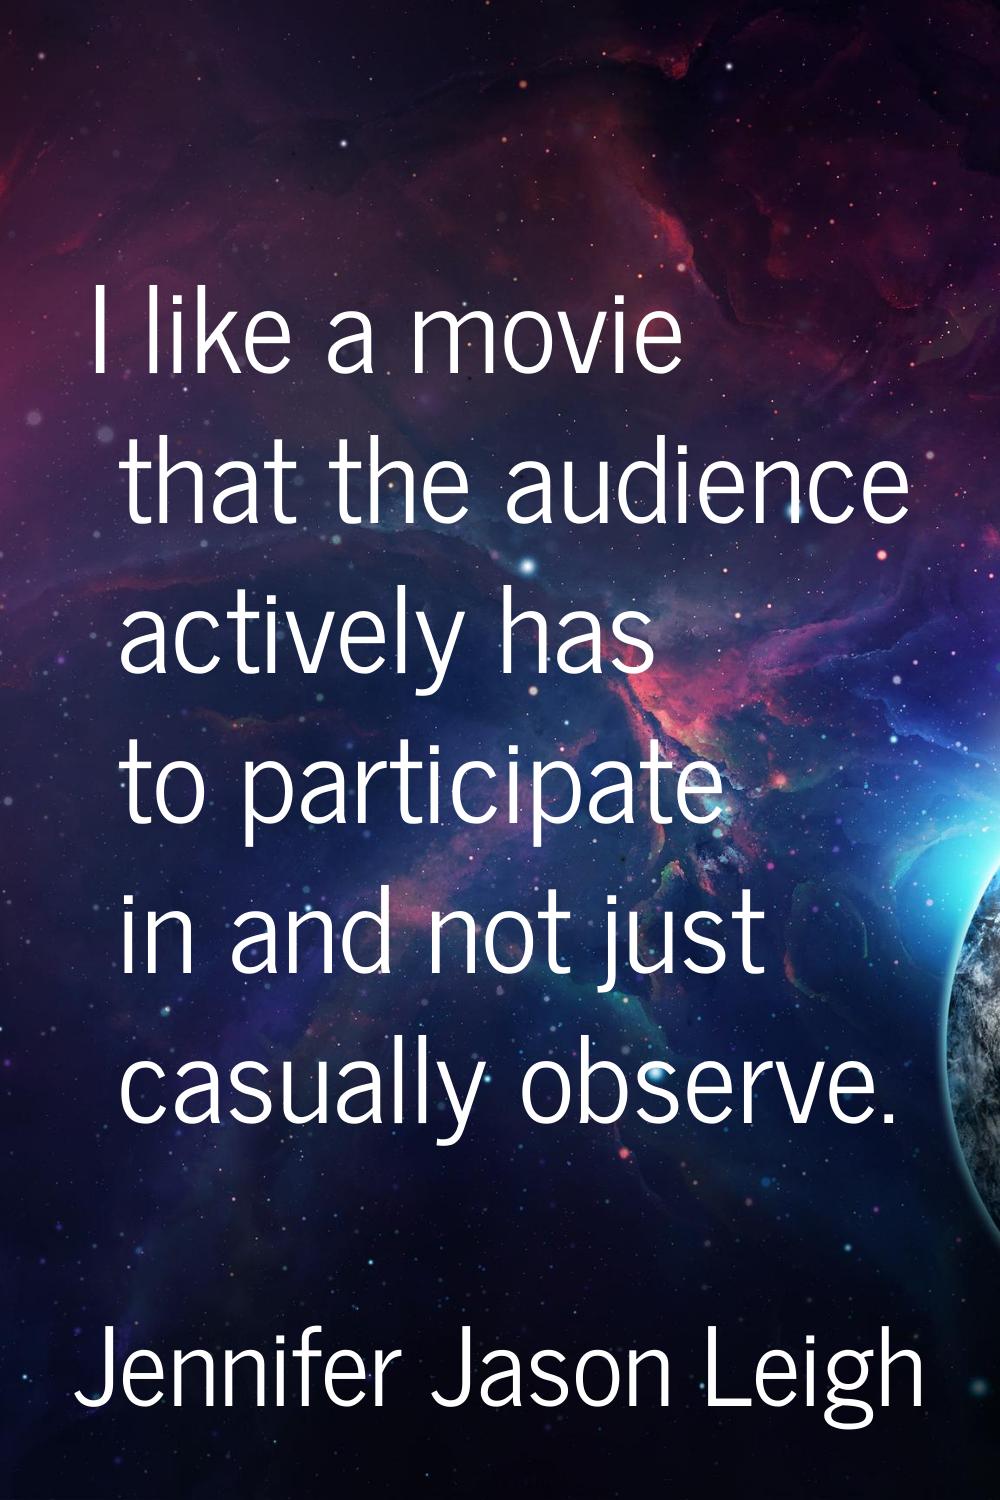 I like a movie that the audience actively has to participate in and not just casually observe.